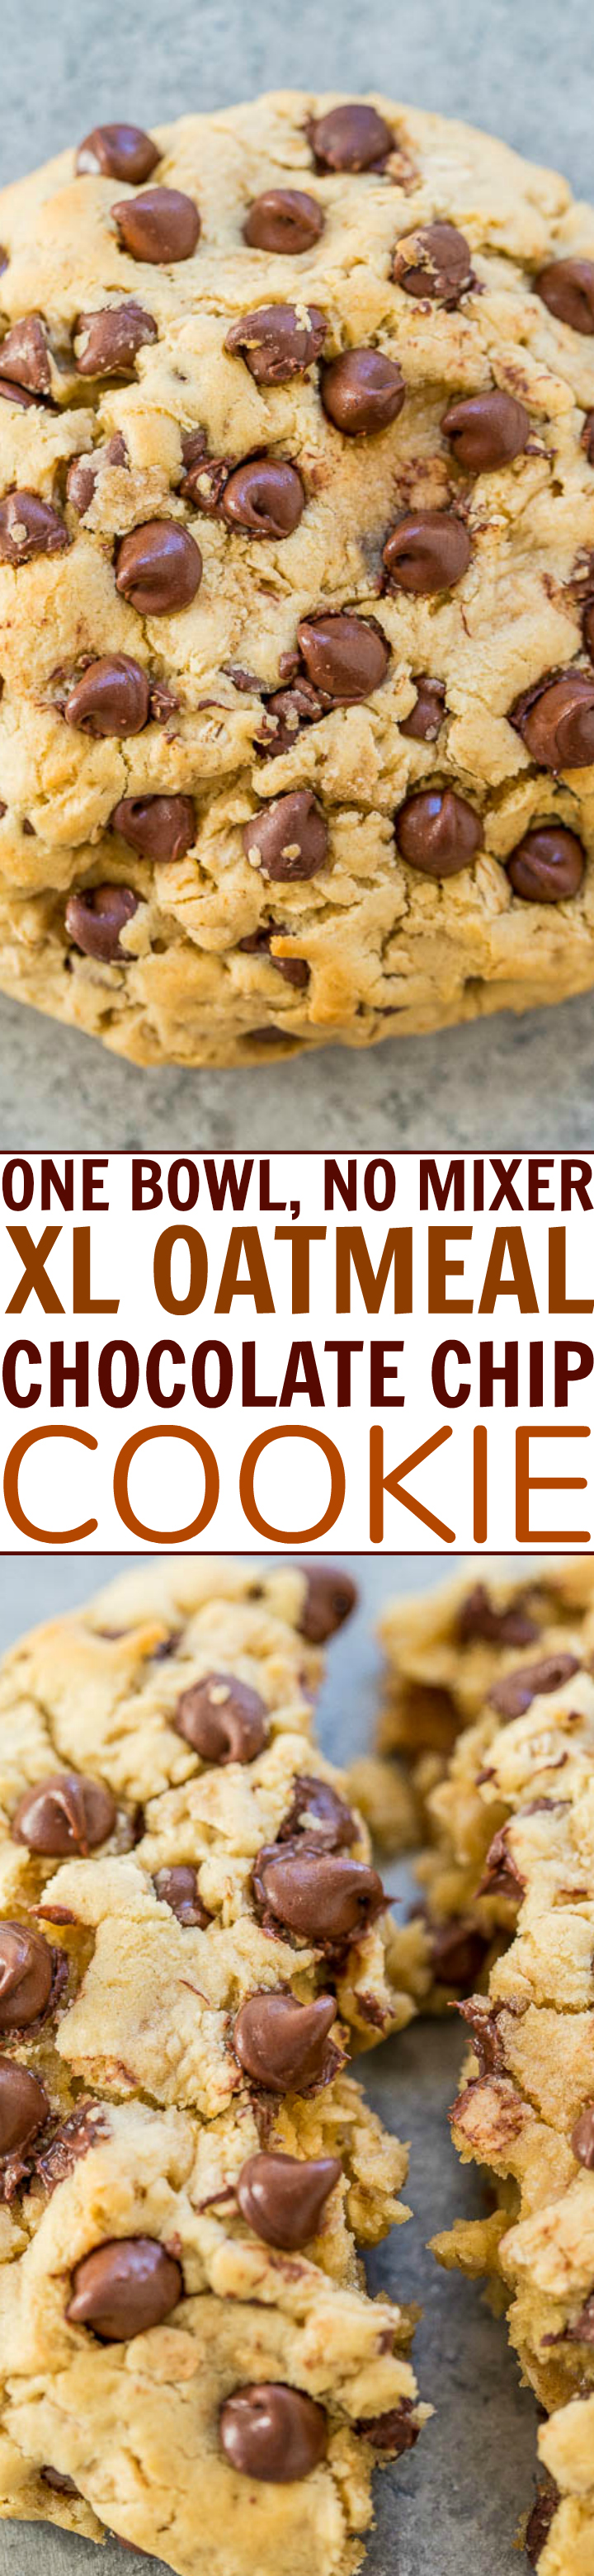 One-Bowl, No-Mixer, Extra-Large Oatmeal Chocolate Chip Cookie - A FAST and EASY recipe for ONE XL soft and chewy very THICK cookie loaded with chocolate!! No mixer needed and so DELISH!!